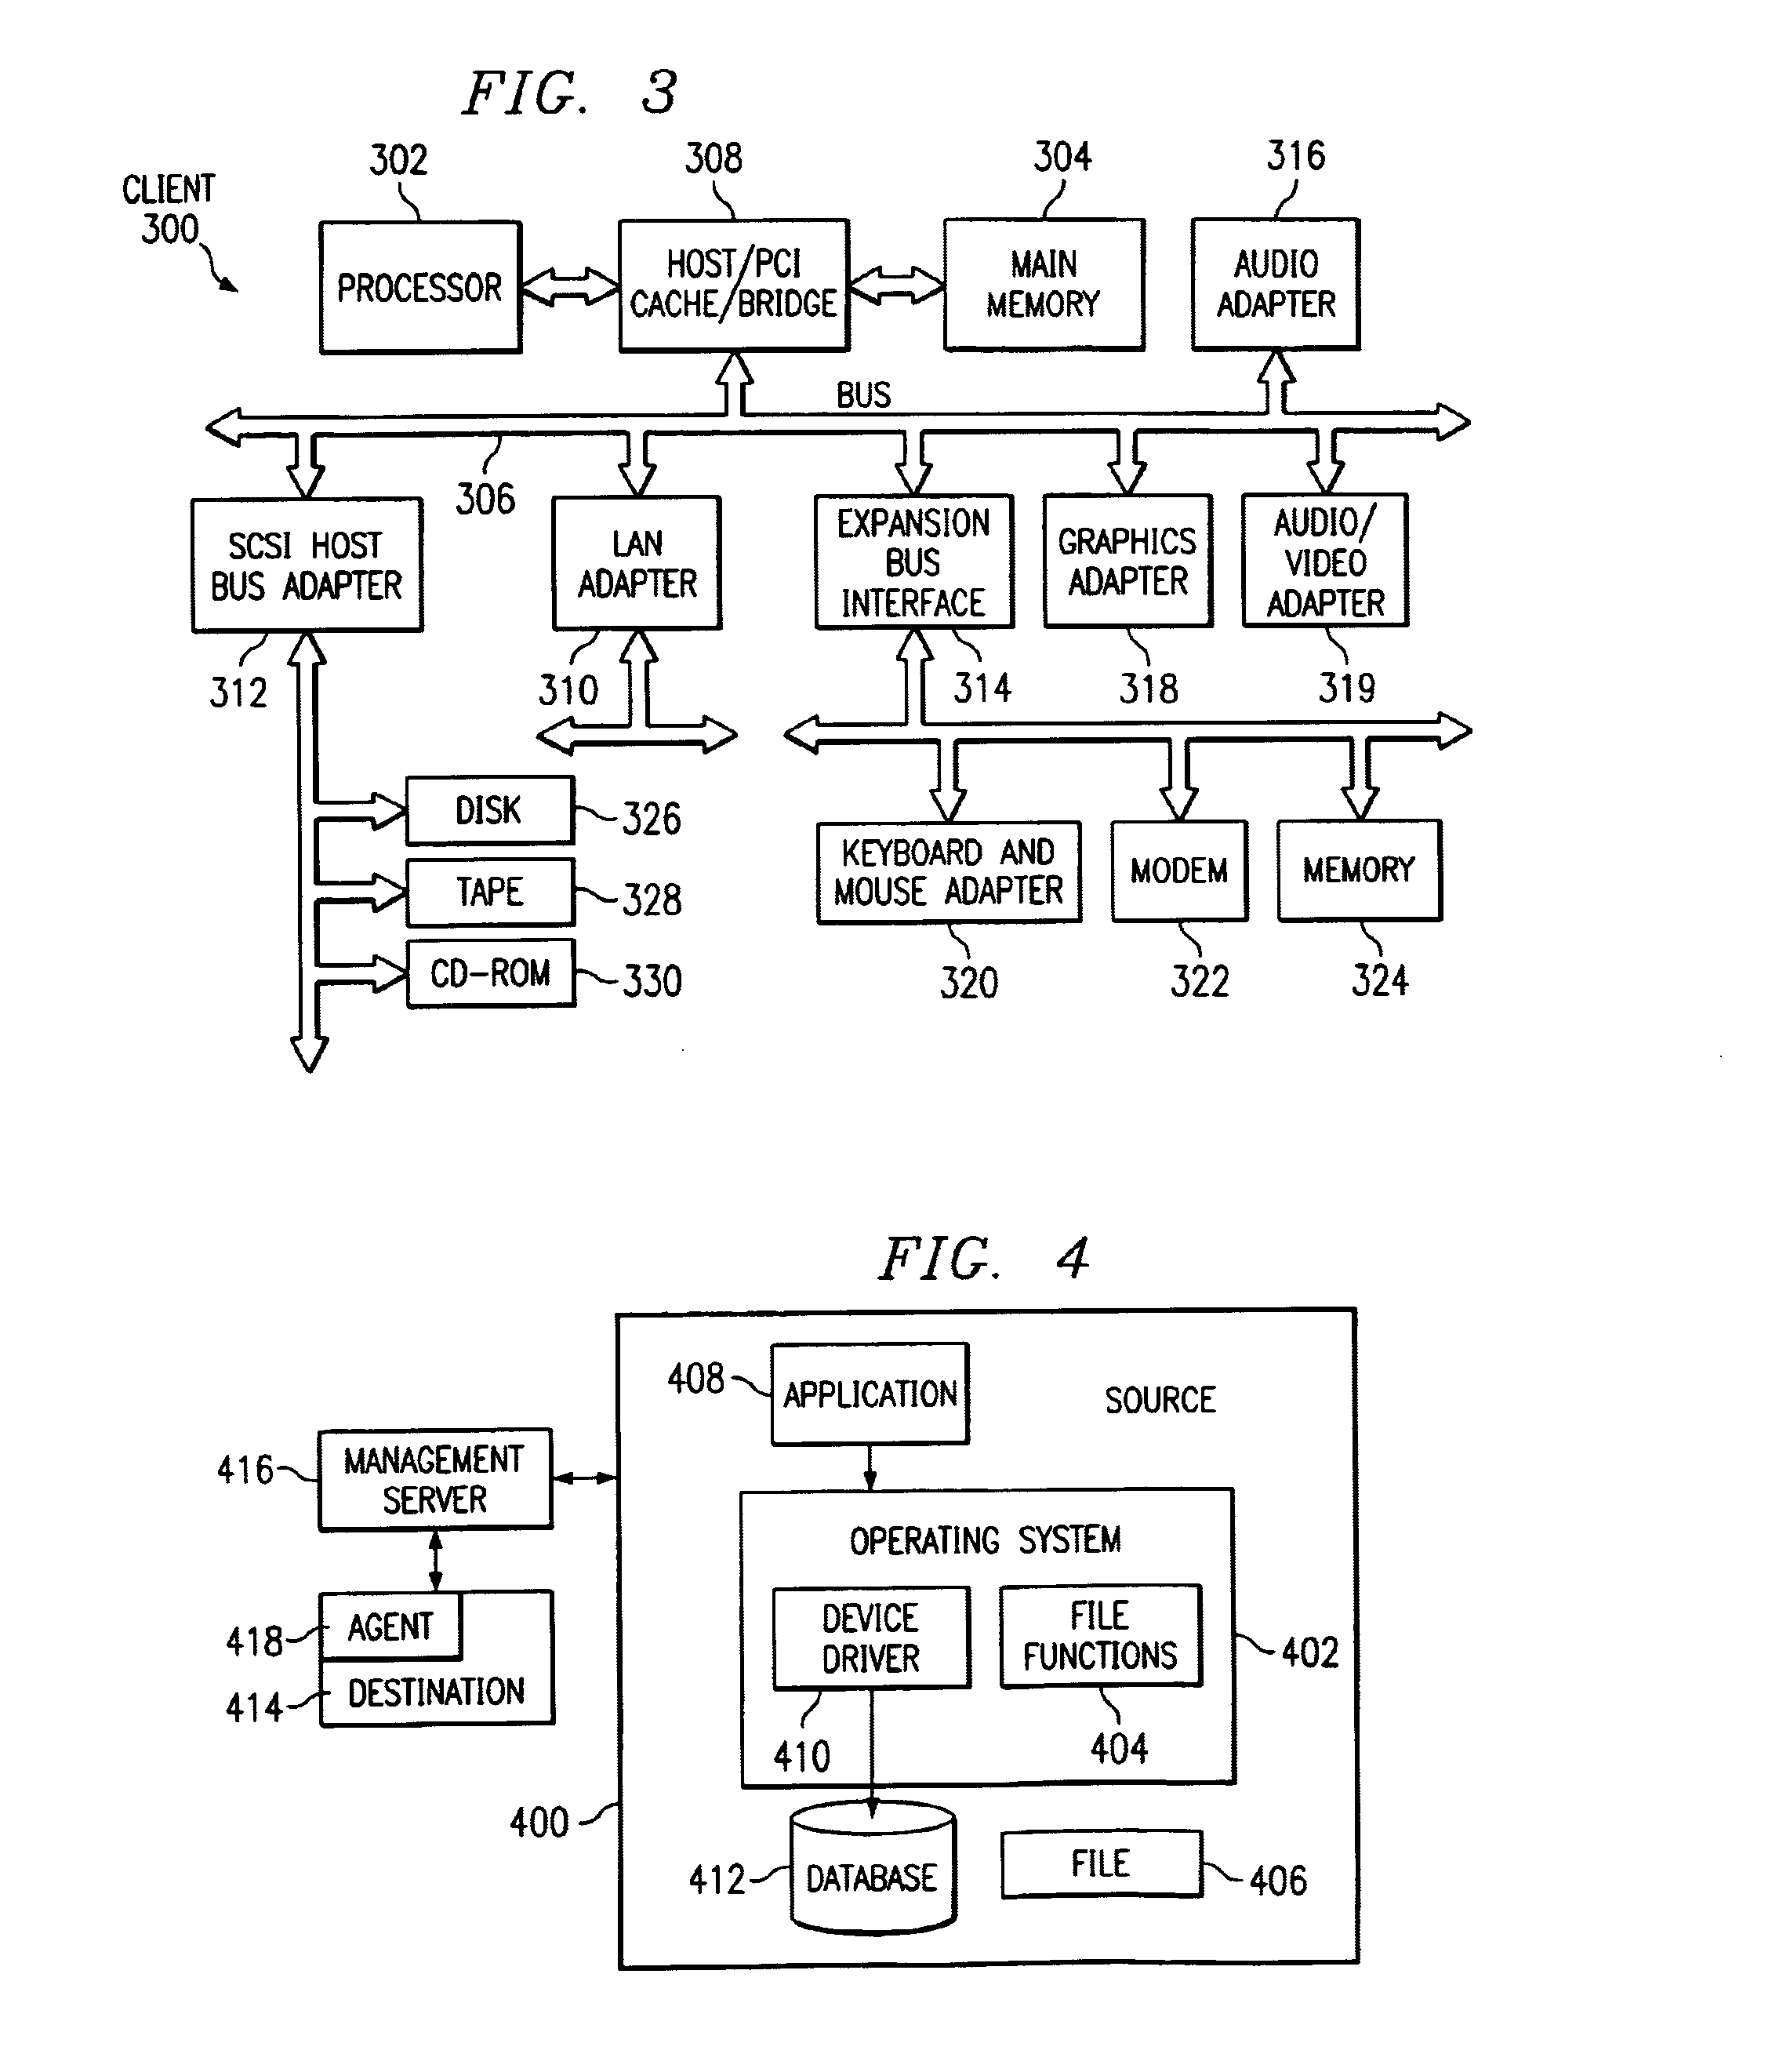 Method and apparatus for the automatic migration of applications and their associated data and configuration files